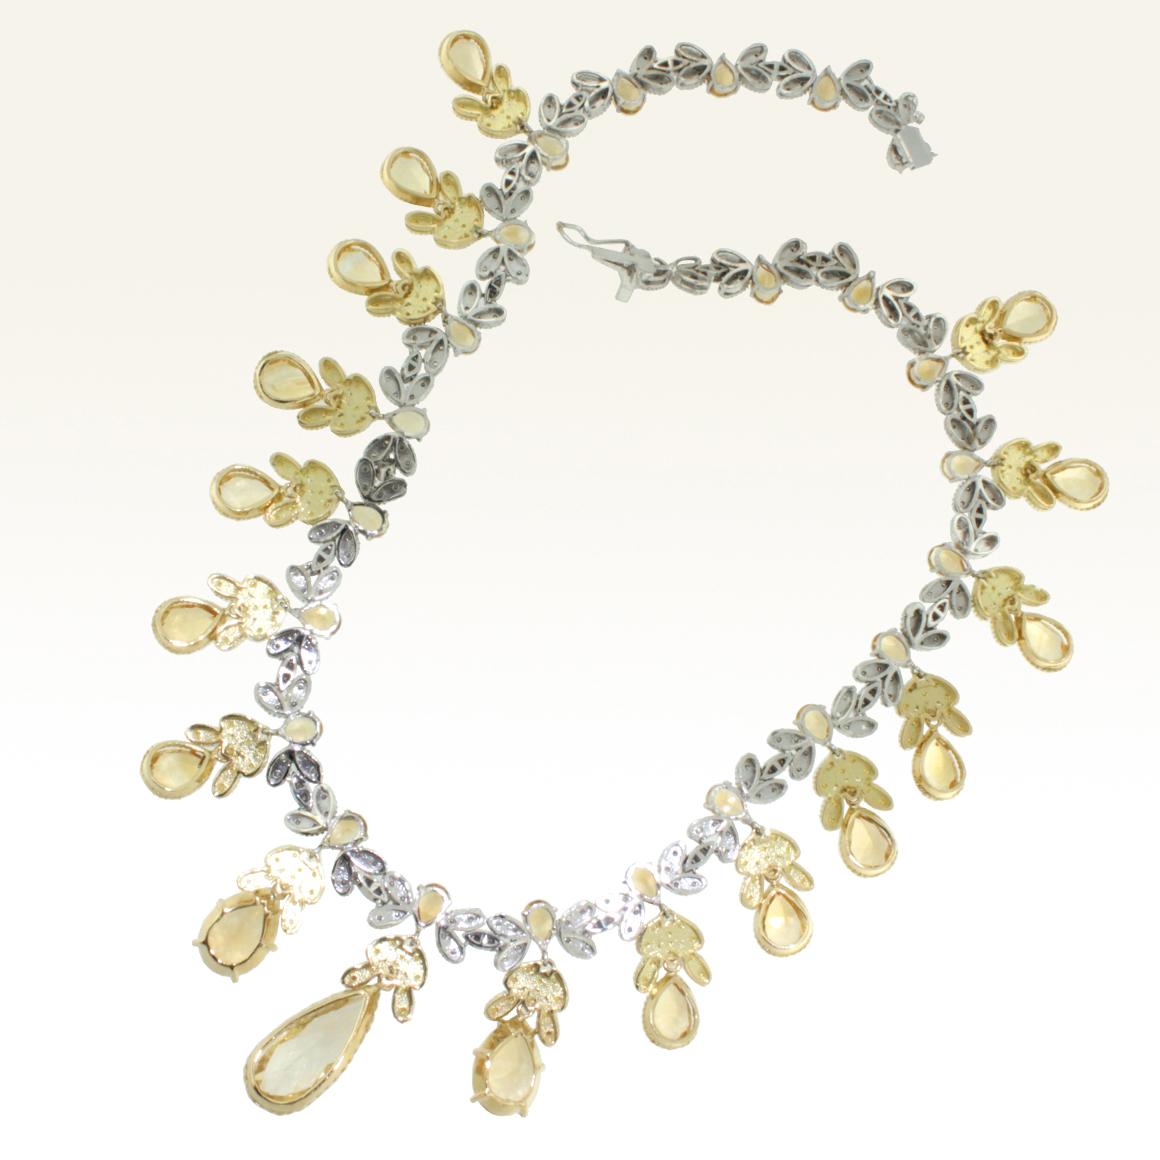 Mixed Cut 18 Karat White and Yellow Gold with Citrines and White Diamonds Necklace